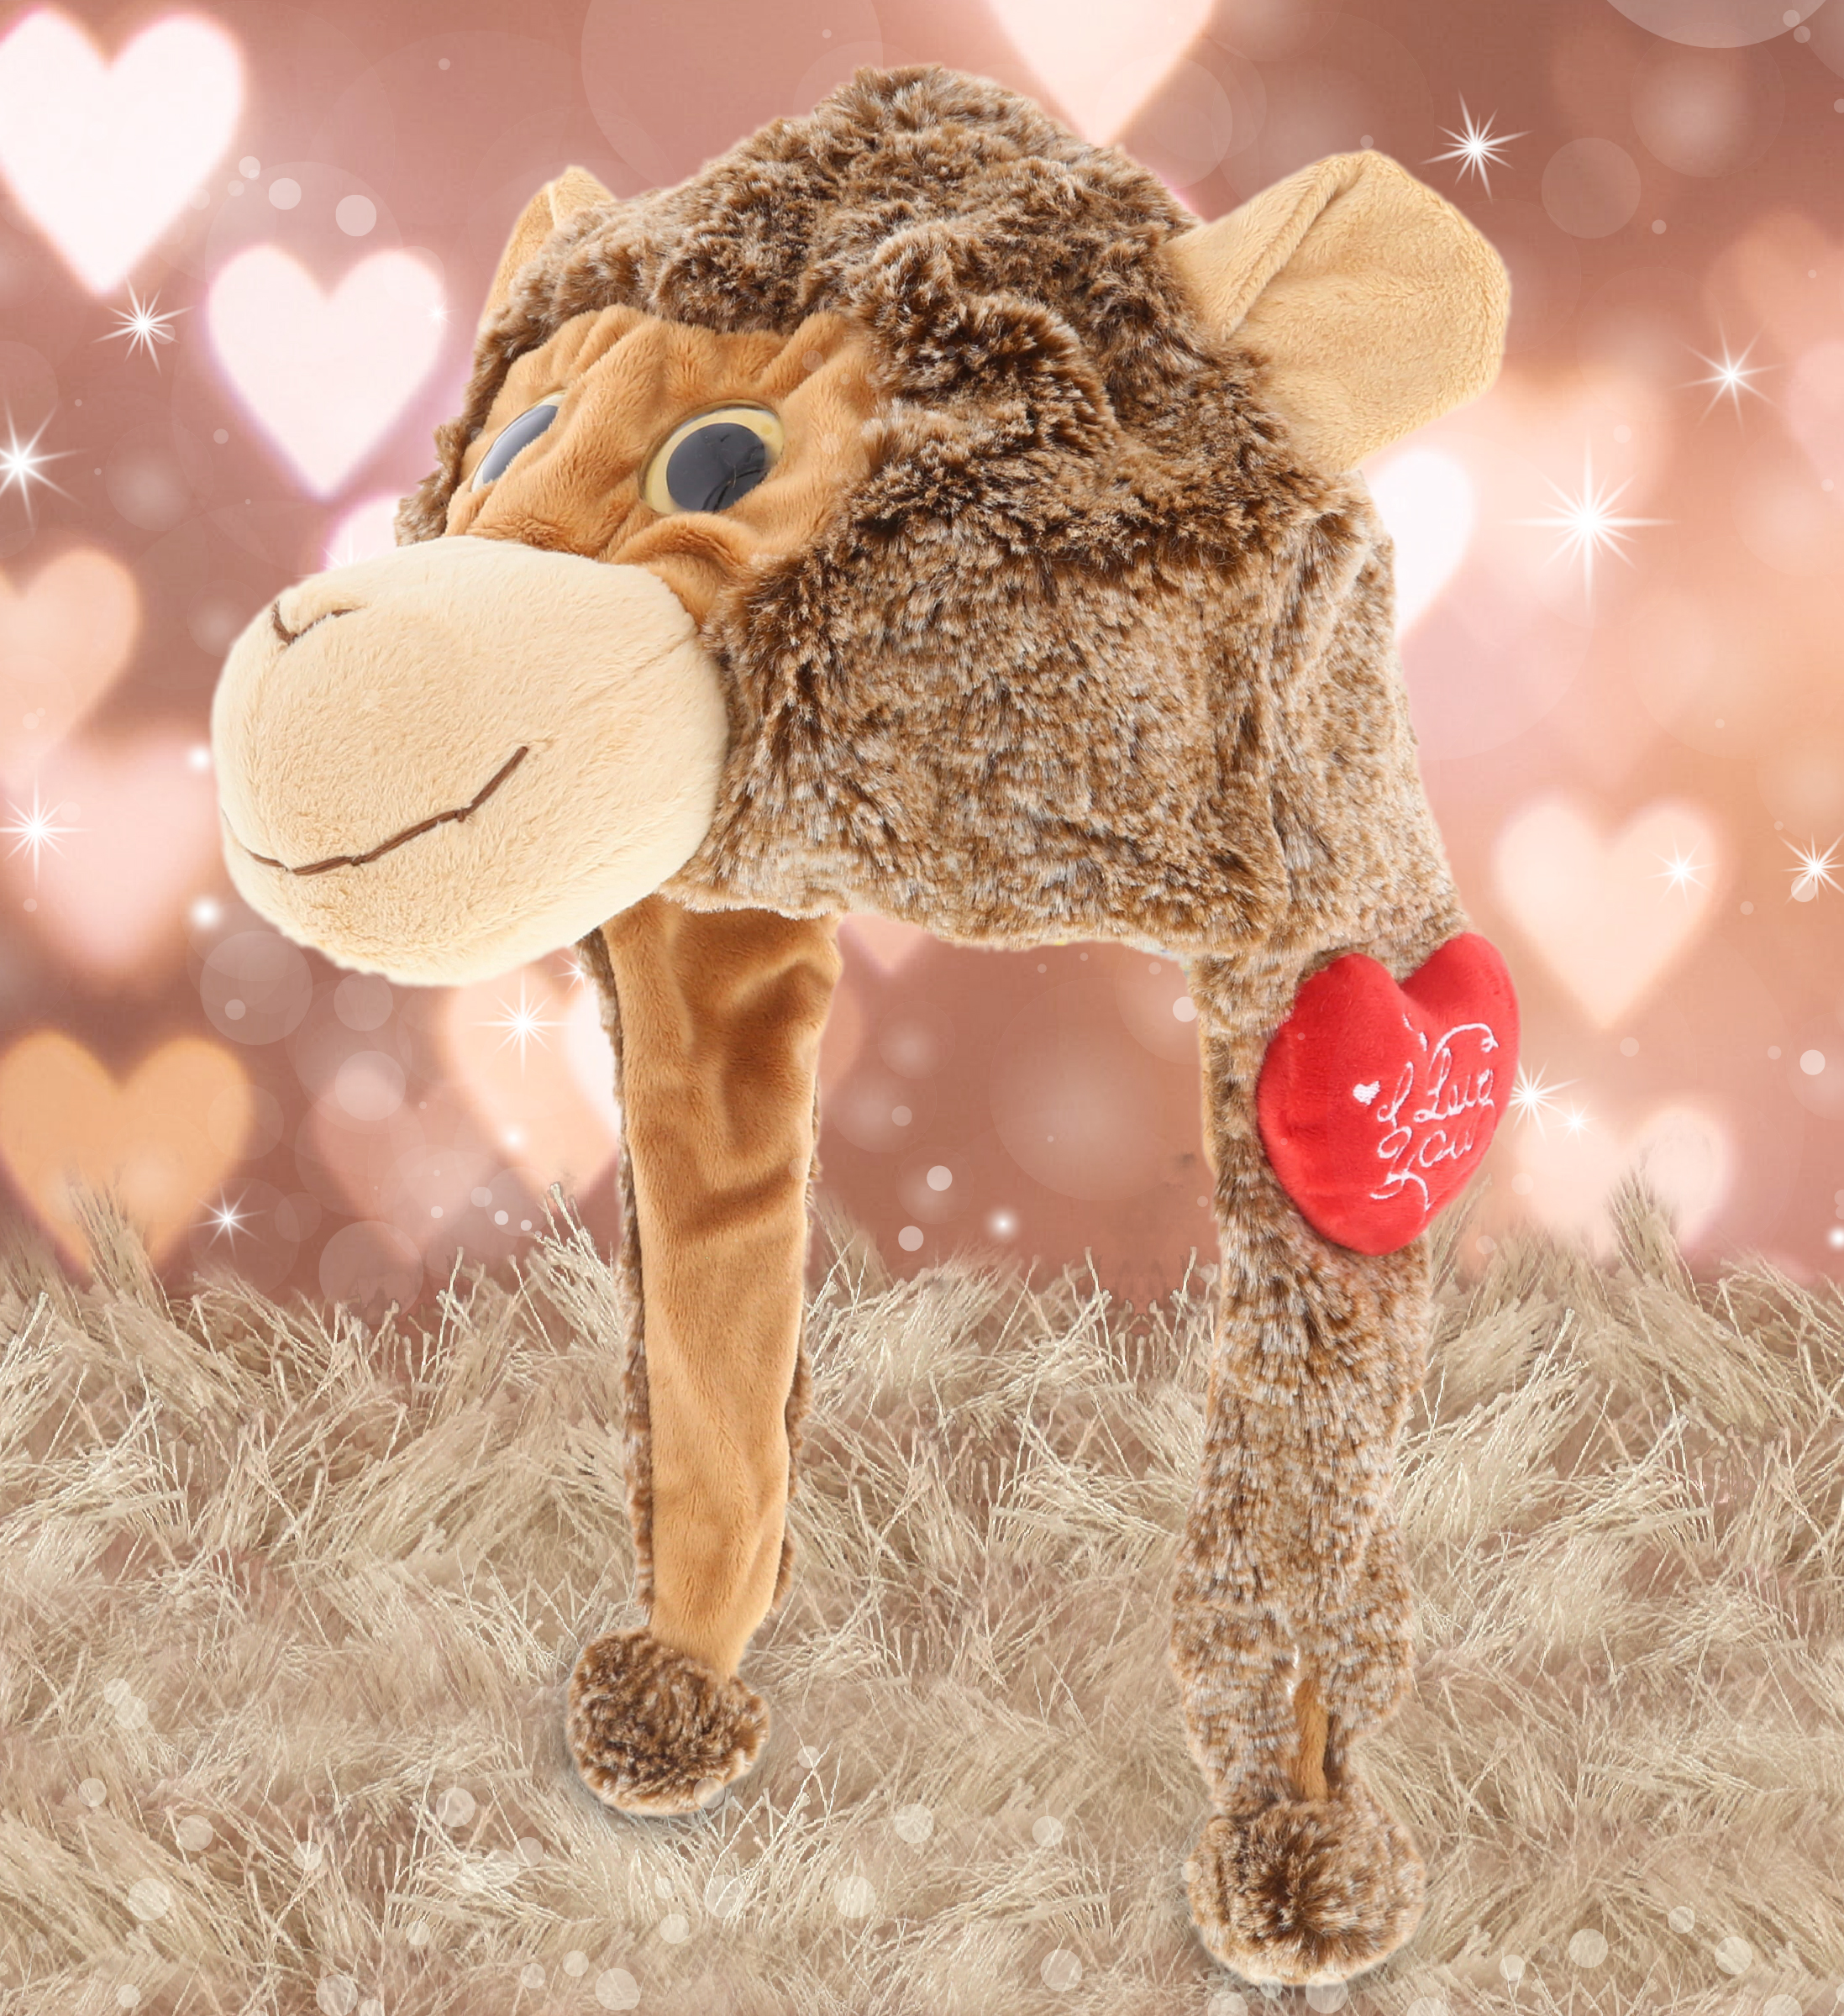 DolliBu I Love You Super Soft Plush Monkey Hat Cute Stuffed Animal with  Red Heart and with Name Personalization for Valentine, Anniversary,  Romantic ぬいぐるみ